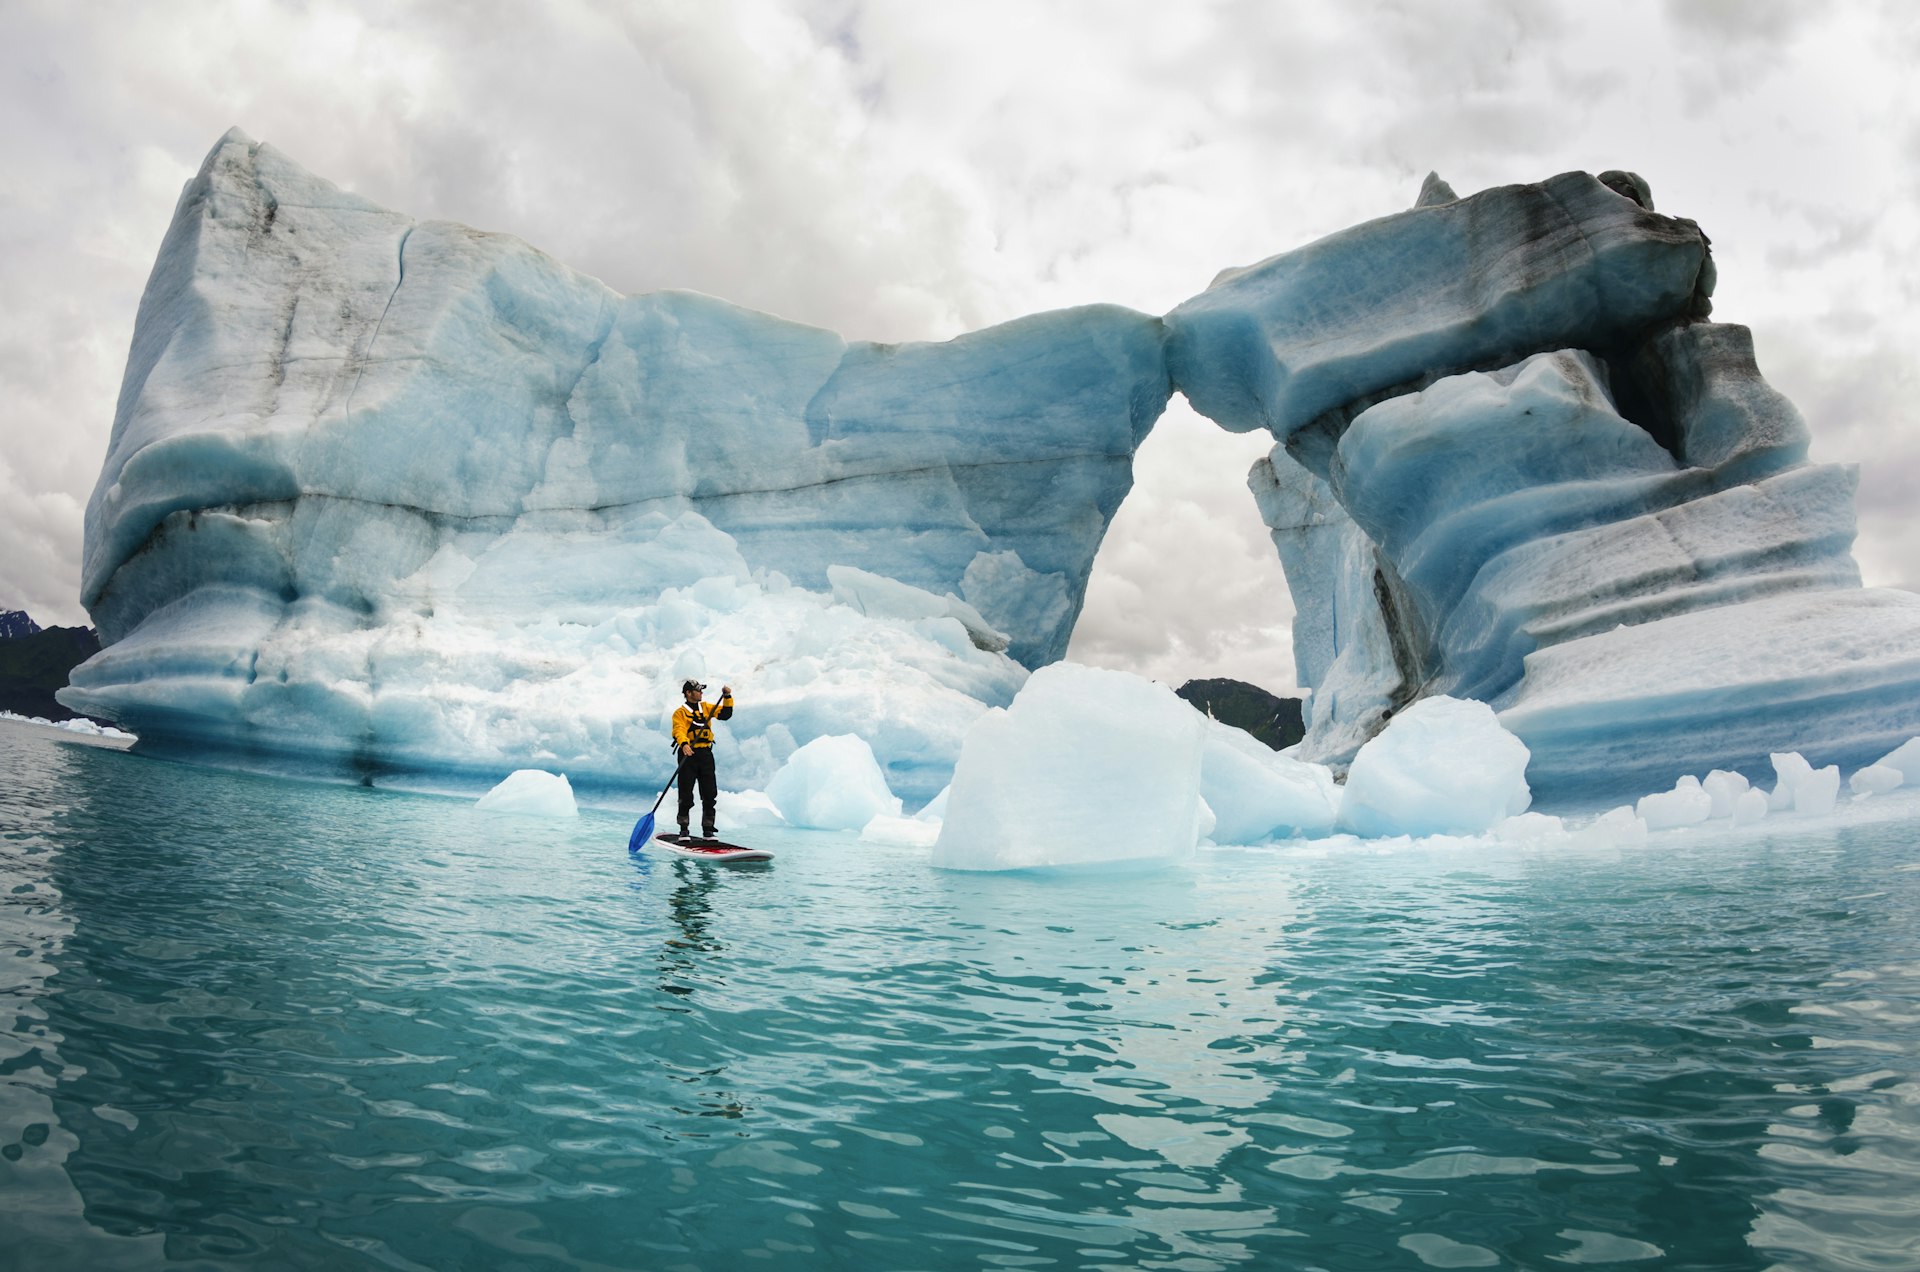 A solo figure on a stand up paddle board (SUP) paddles past icebergs